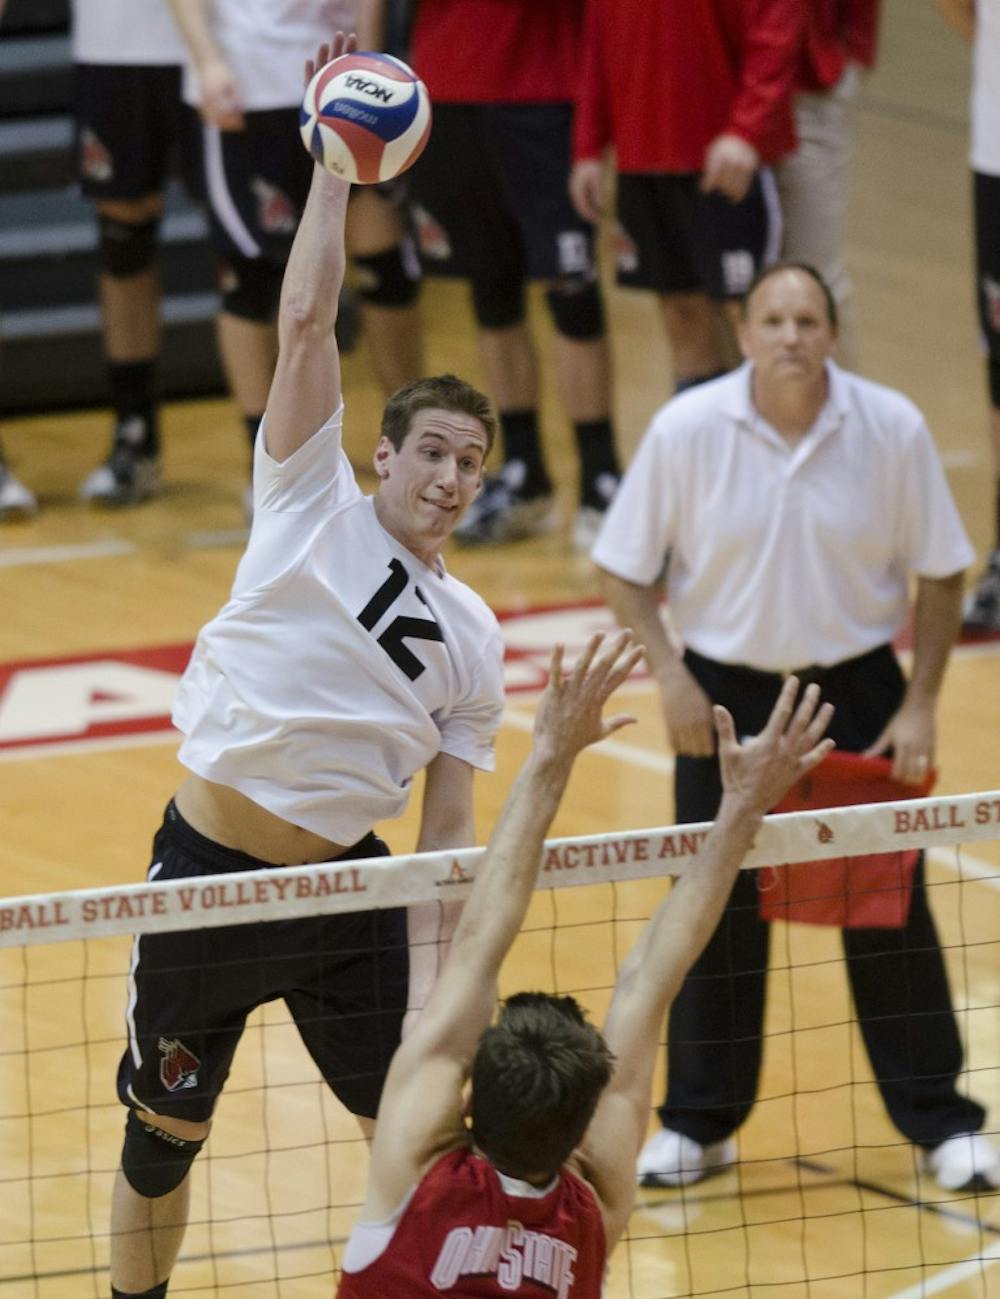 Junior outside attacker Matt Sutherland hits the ball over the net against Ohio State in the second set March 23 at Worthen Arena. Sutherland had 14 kills. DN PHOTO BREANNA DAUGHERTY